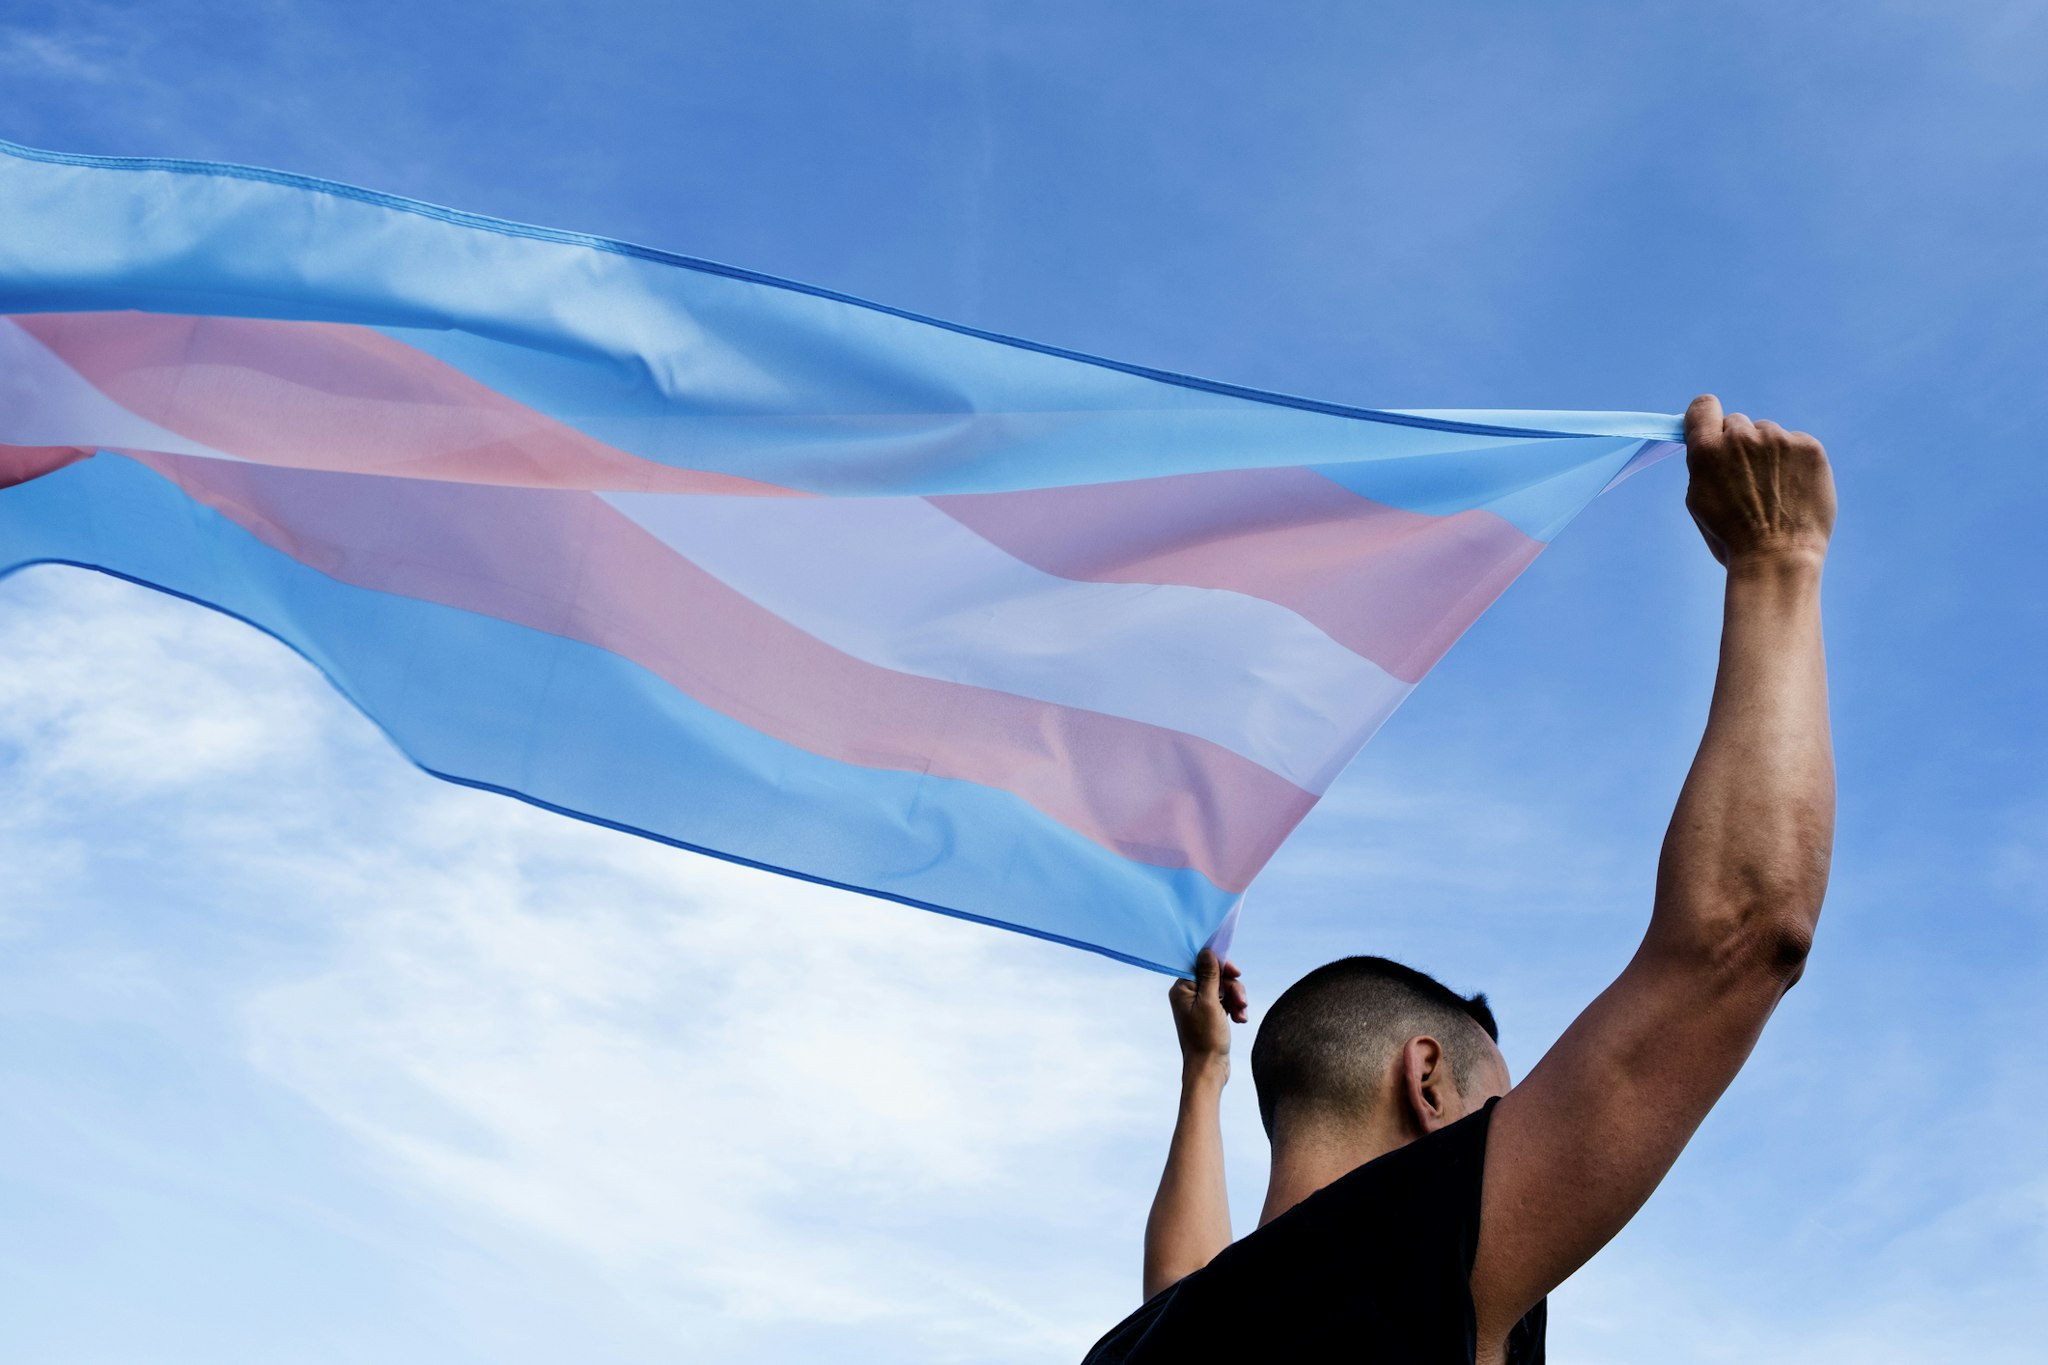 nito100. Getty Images. a young caucasian person, seen from behind, holding a transgender pride flag over his or her head against the blue sky